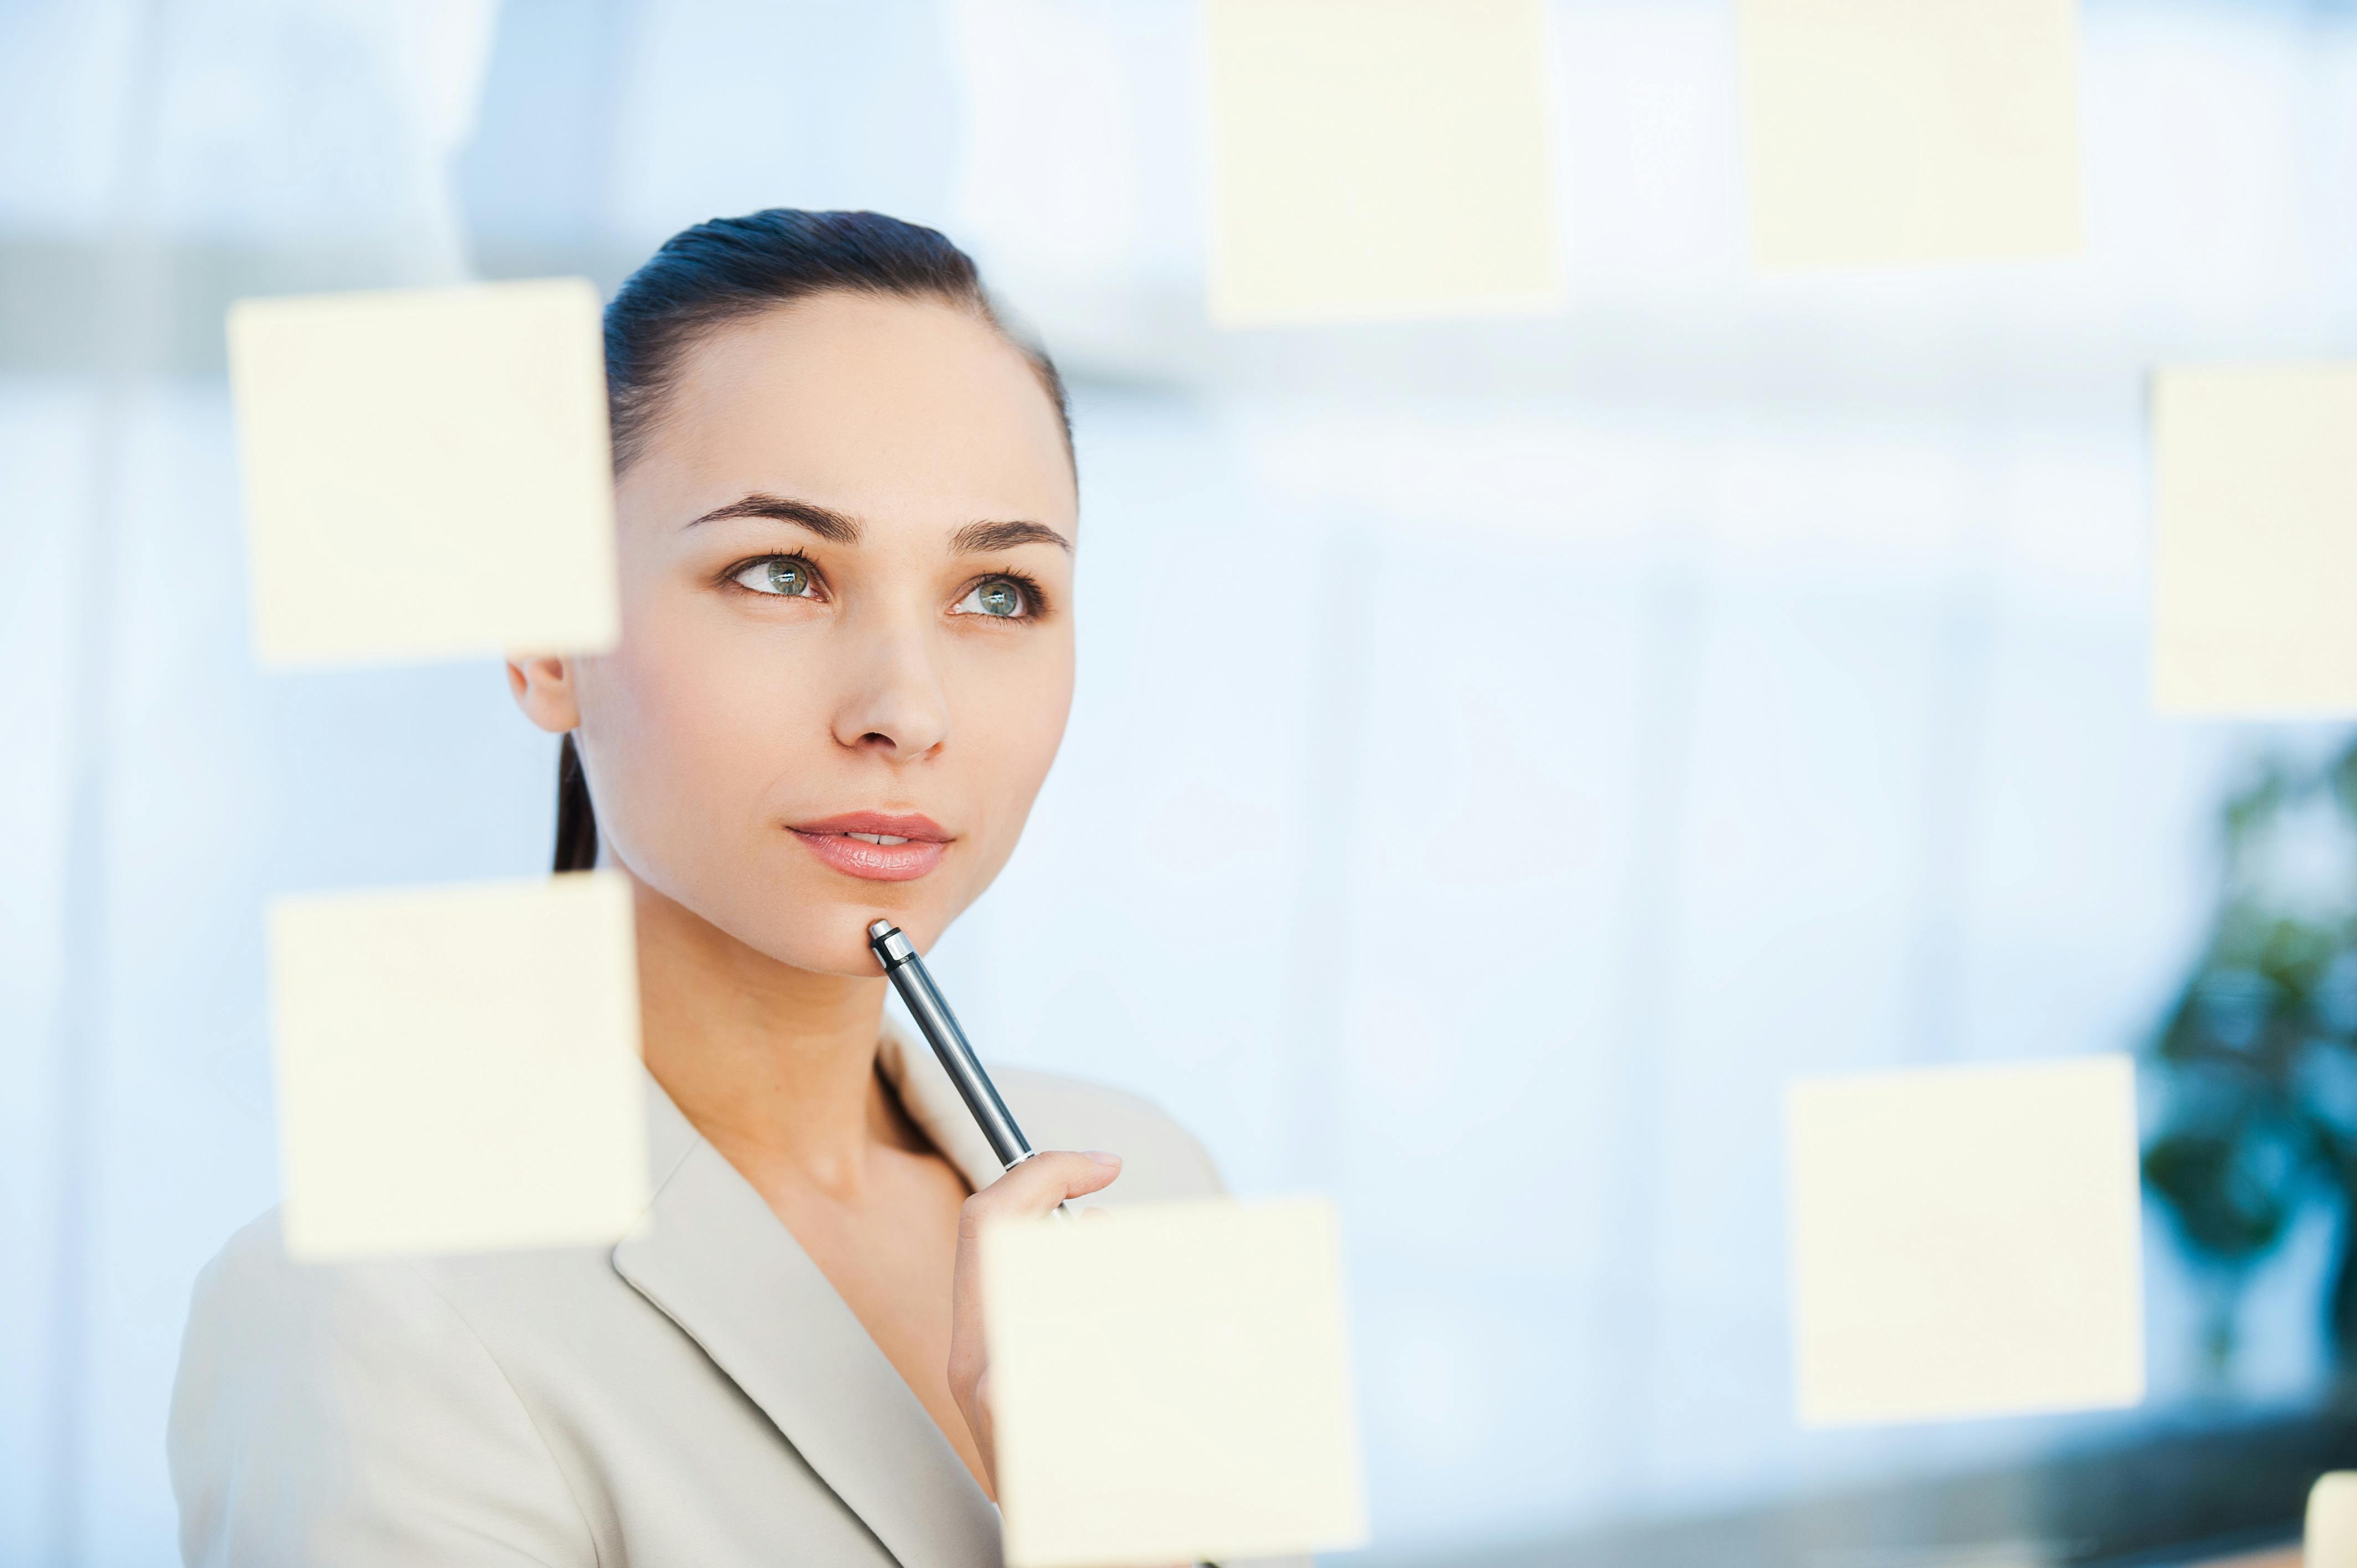  woman reading sticky notes in a business office setting